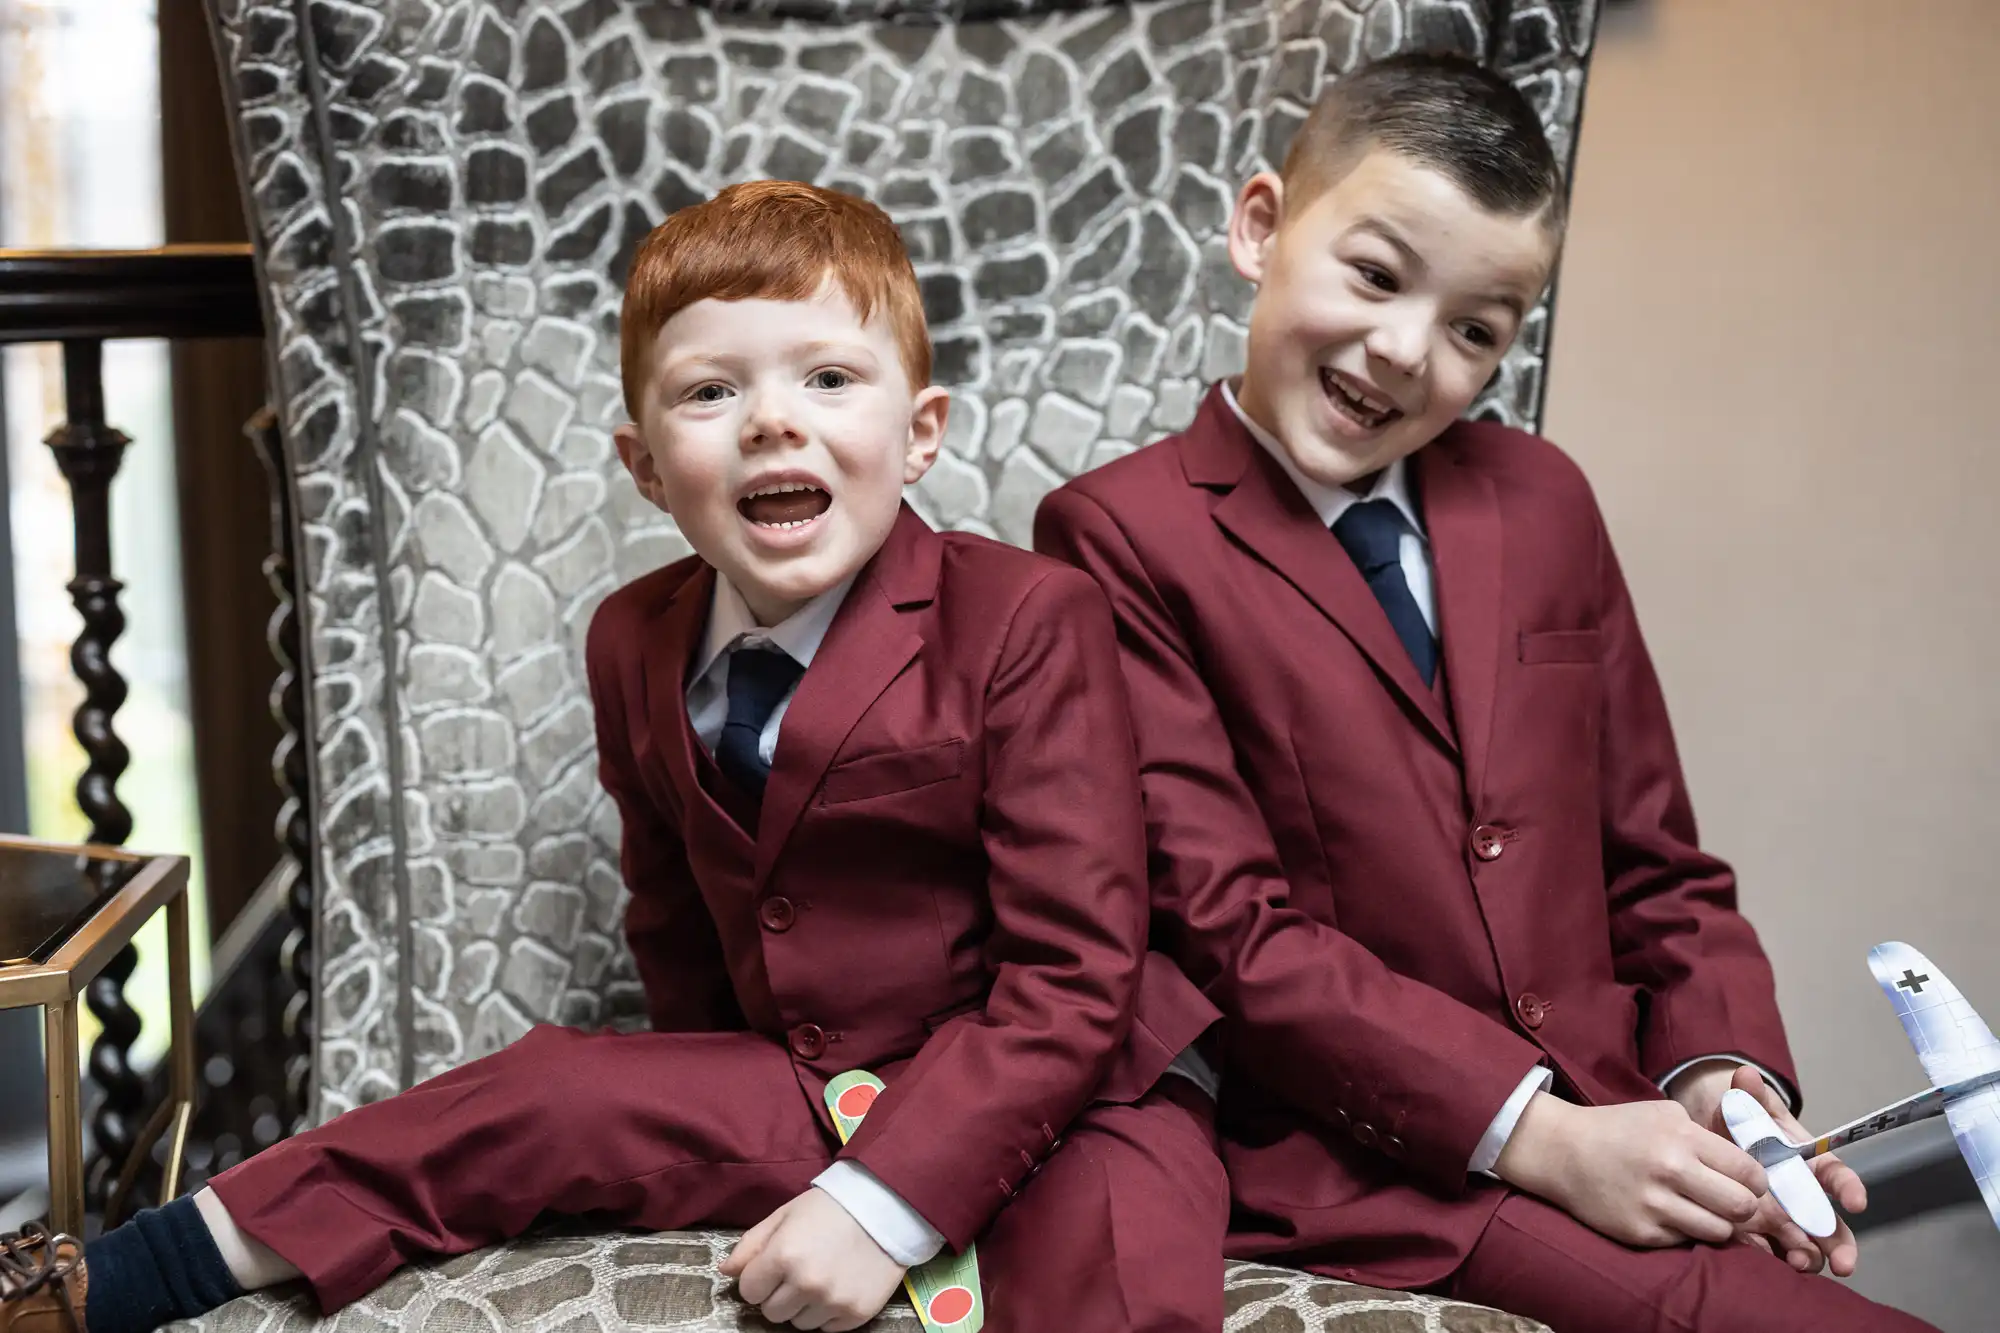 Two boys in matching maroon suits and blue ties sit on a patterned chair, smiling and holding toys.